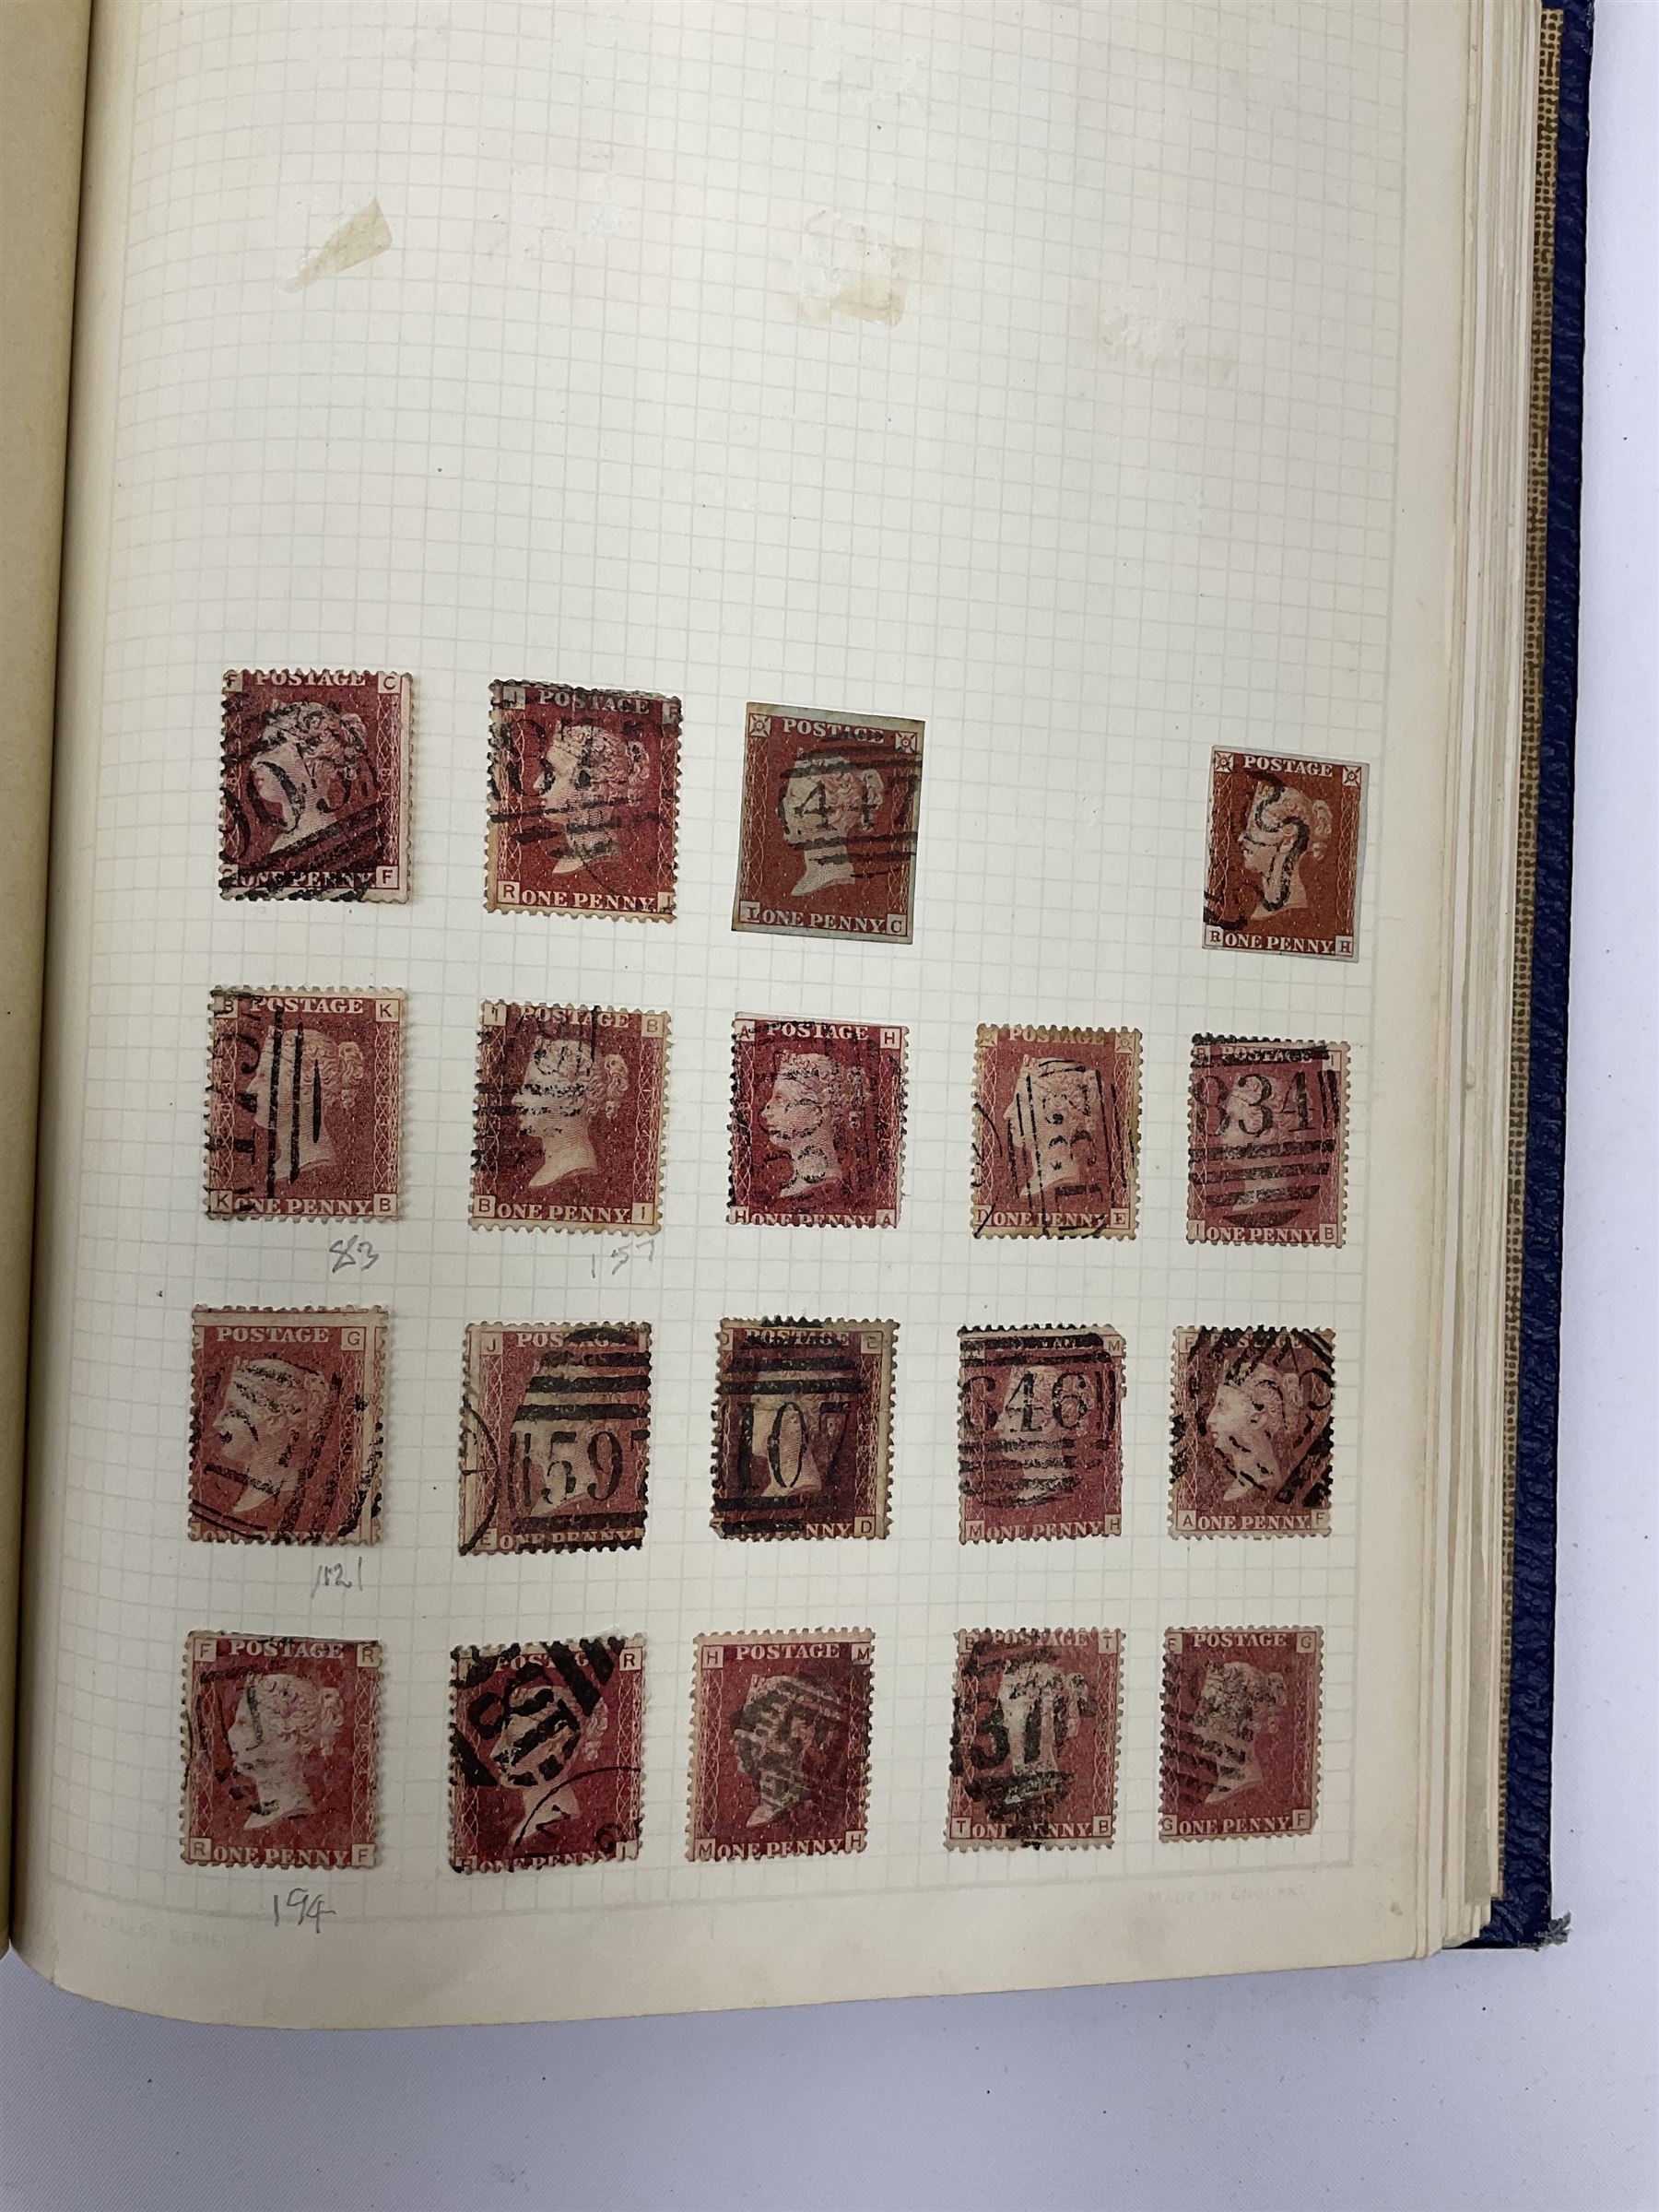 Great British Queen Victoria and later stamps including imperf penny reds with a few MX cancel examp - Image 8 of 9